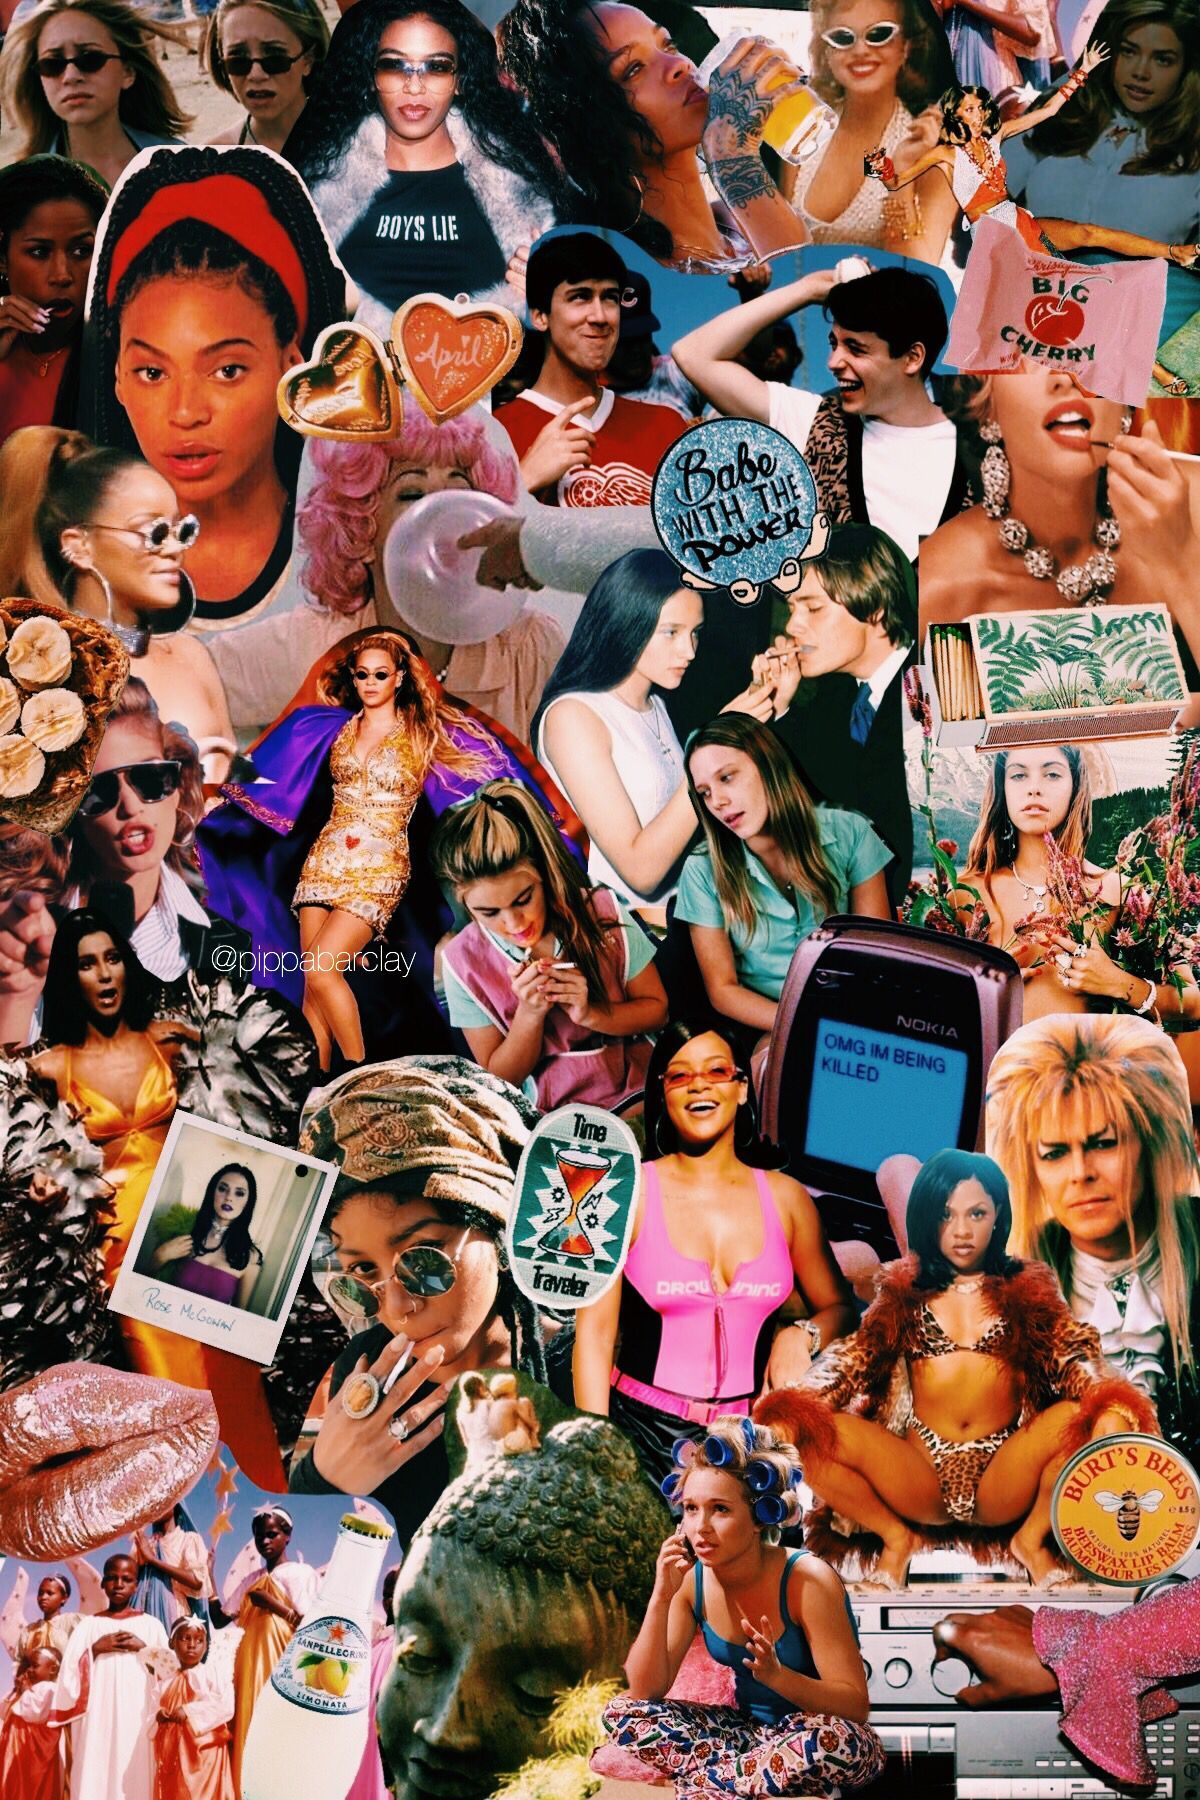 A collage of pictures of various people, including Beyoncé, from the 2000s. - 2000s